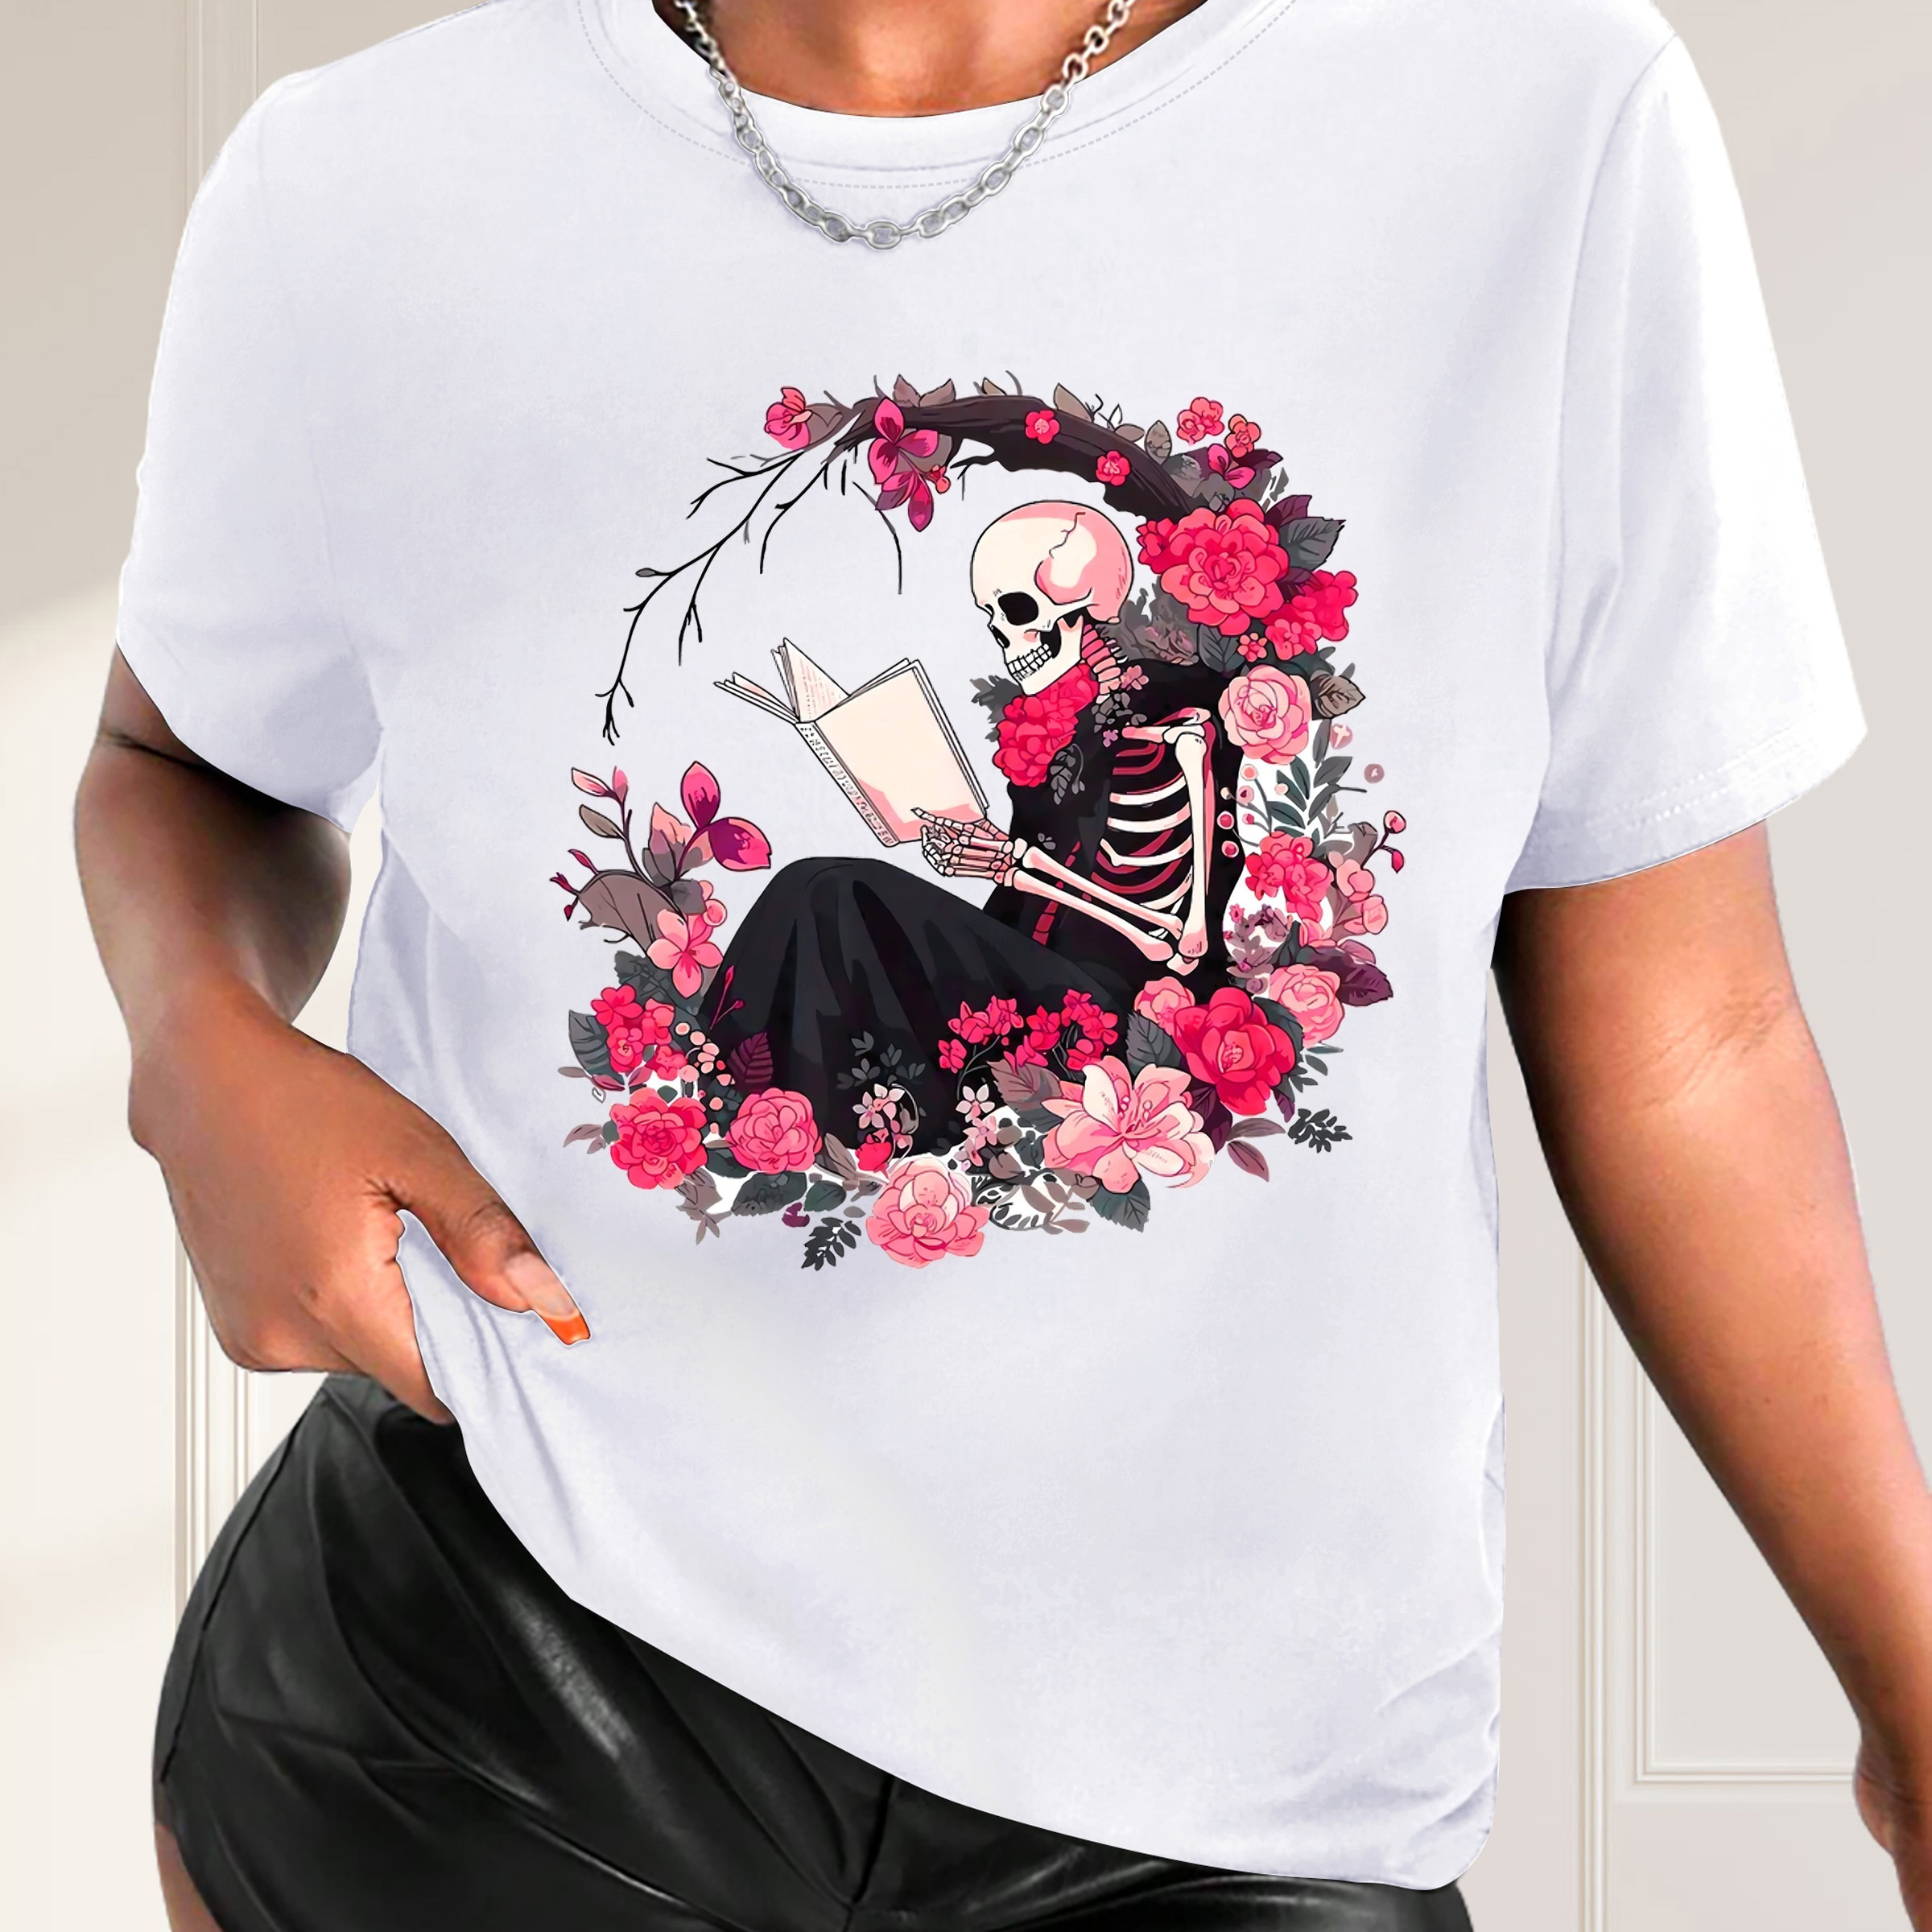 

Valentine's Day Flower And Skull Printed Causal Round Neck T-shirt, Short Sleeves Sports Running Tops, Women's Activewear